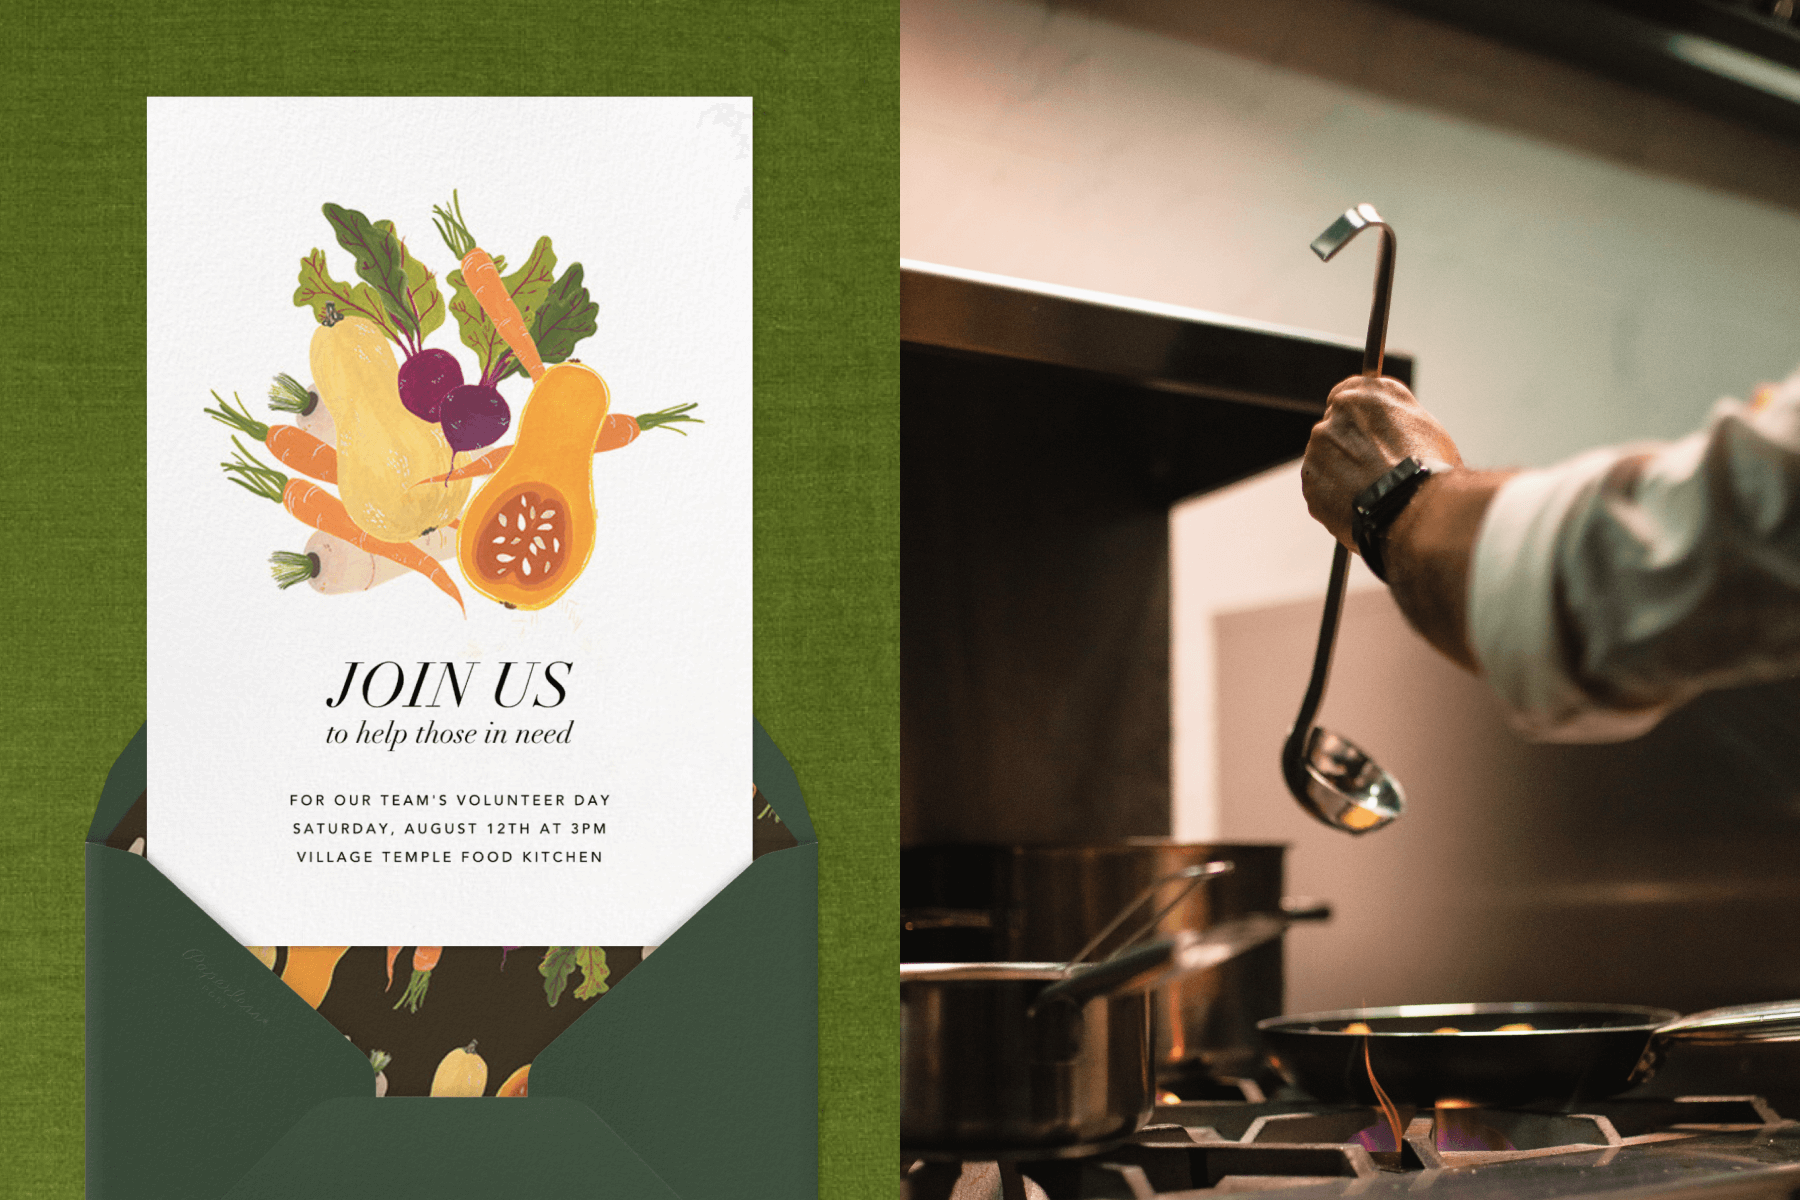 Left: A volunteer invitation with an illustration of fall vegetables; Right: A hand holding a ladle over a pan on a stove.